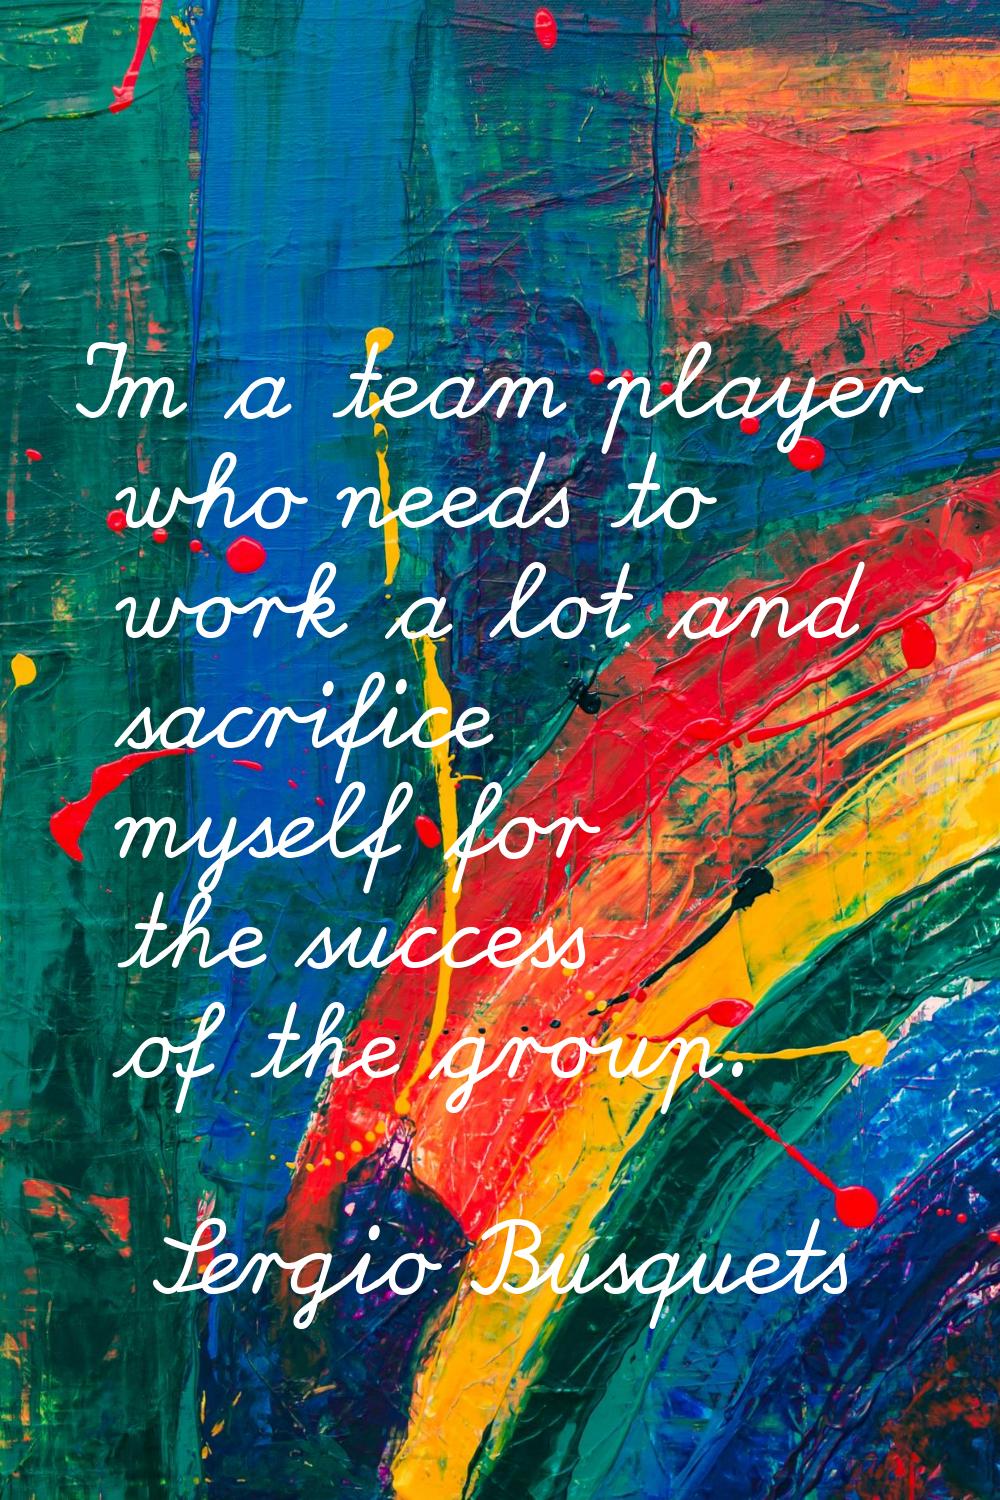 I'm a team player who needs to work a lot and sacrifice myself for the success of the group.